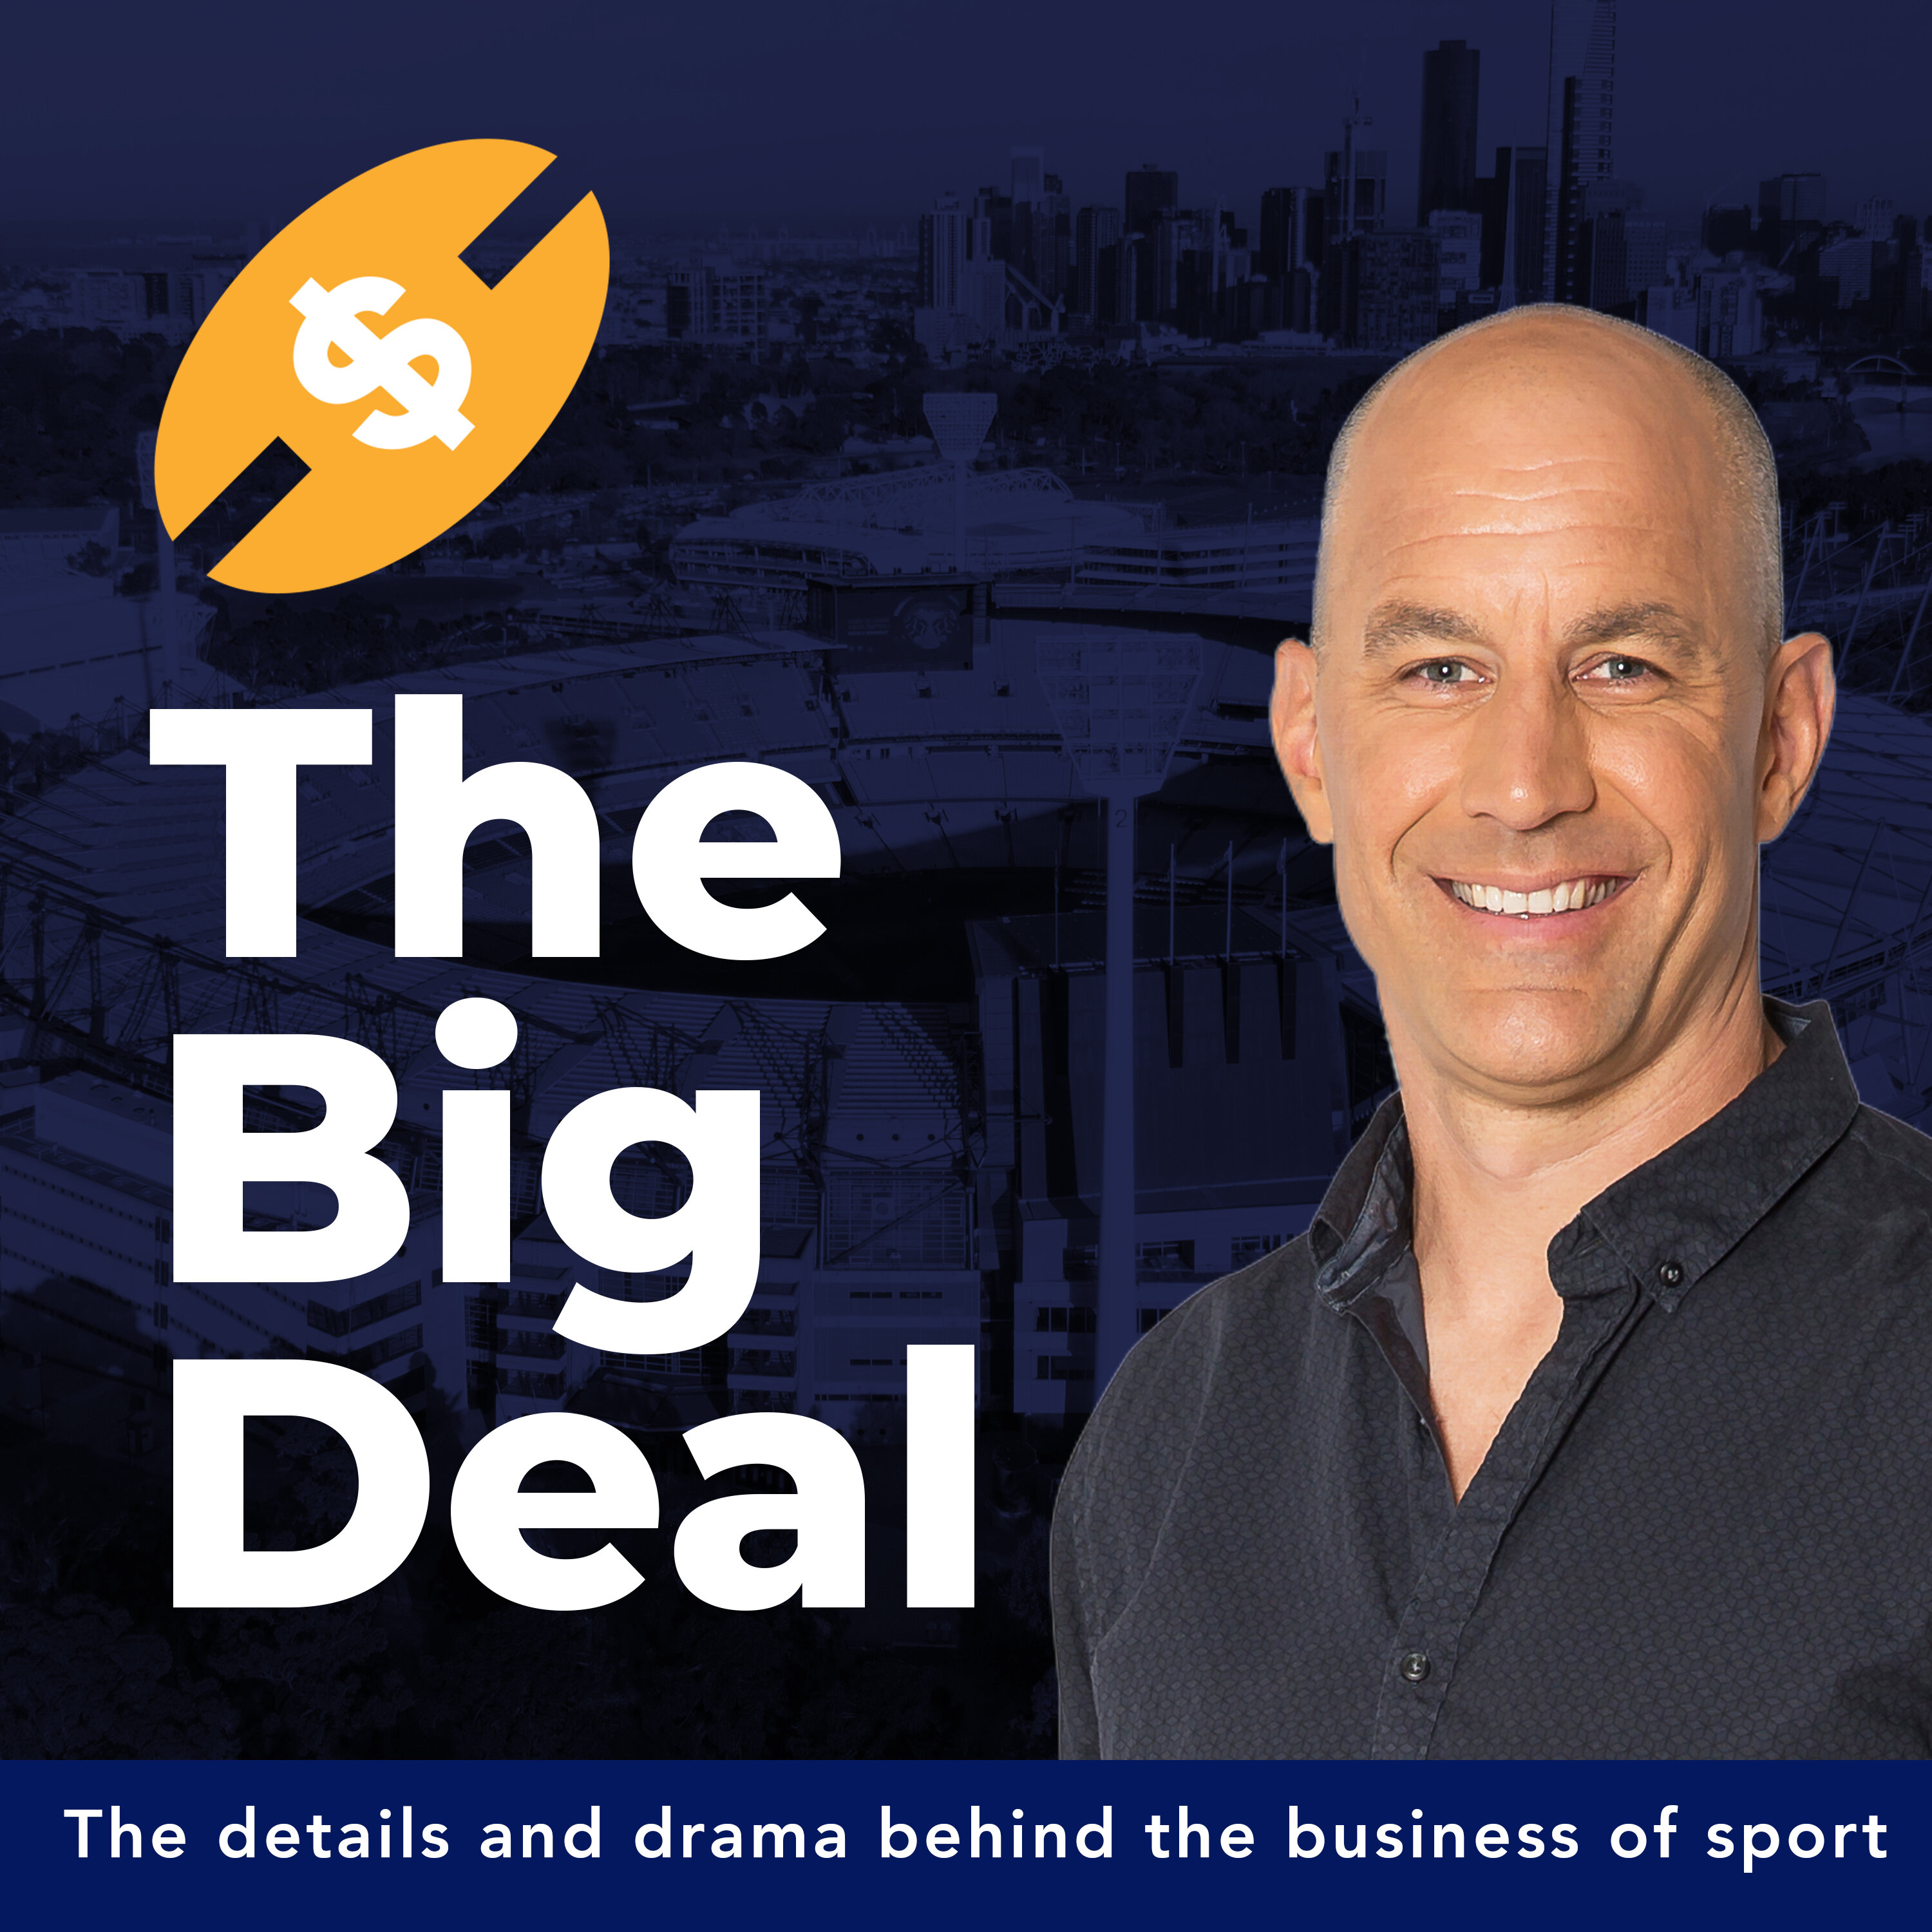 Sports biz wrap: Round 1 records smashed, Tassie unveiled, Harley Reid's debut, Gabba redevelopment drama, NRL's 'authenticity', white-ball's stop clock, English clubs coming down under & more